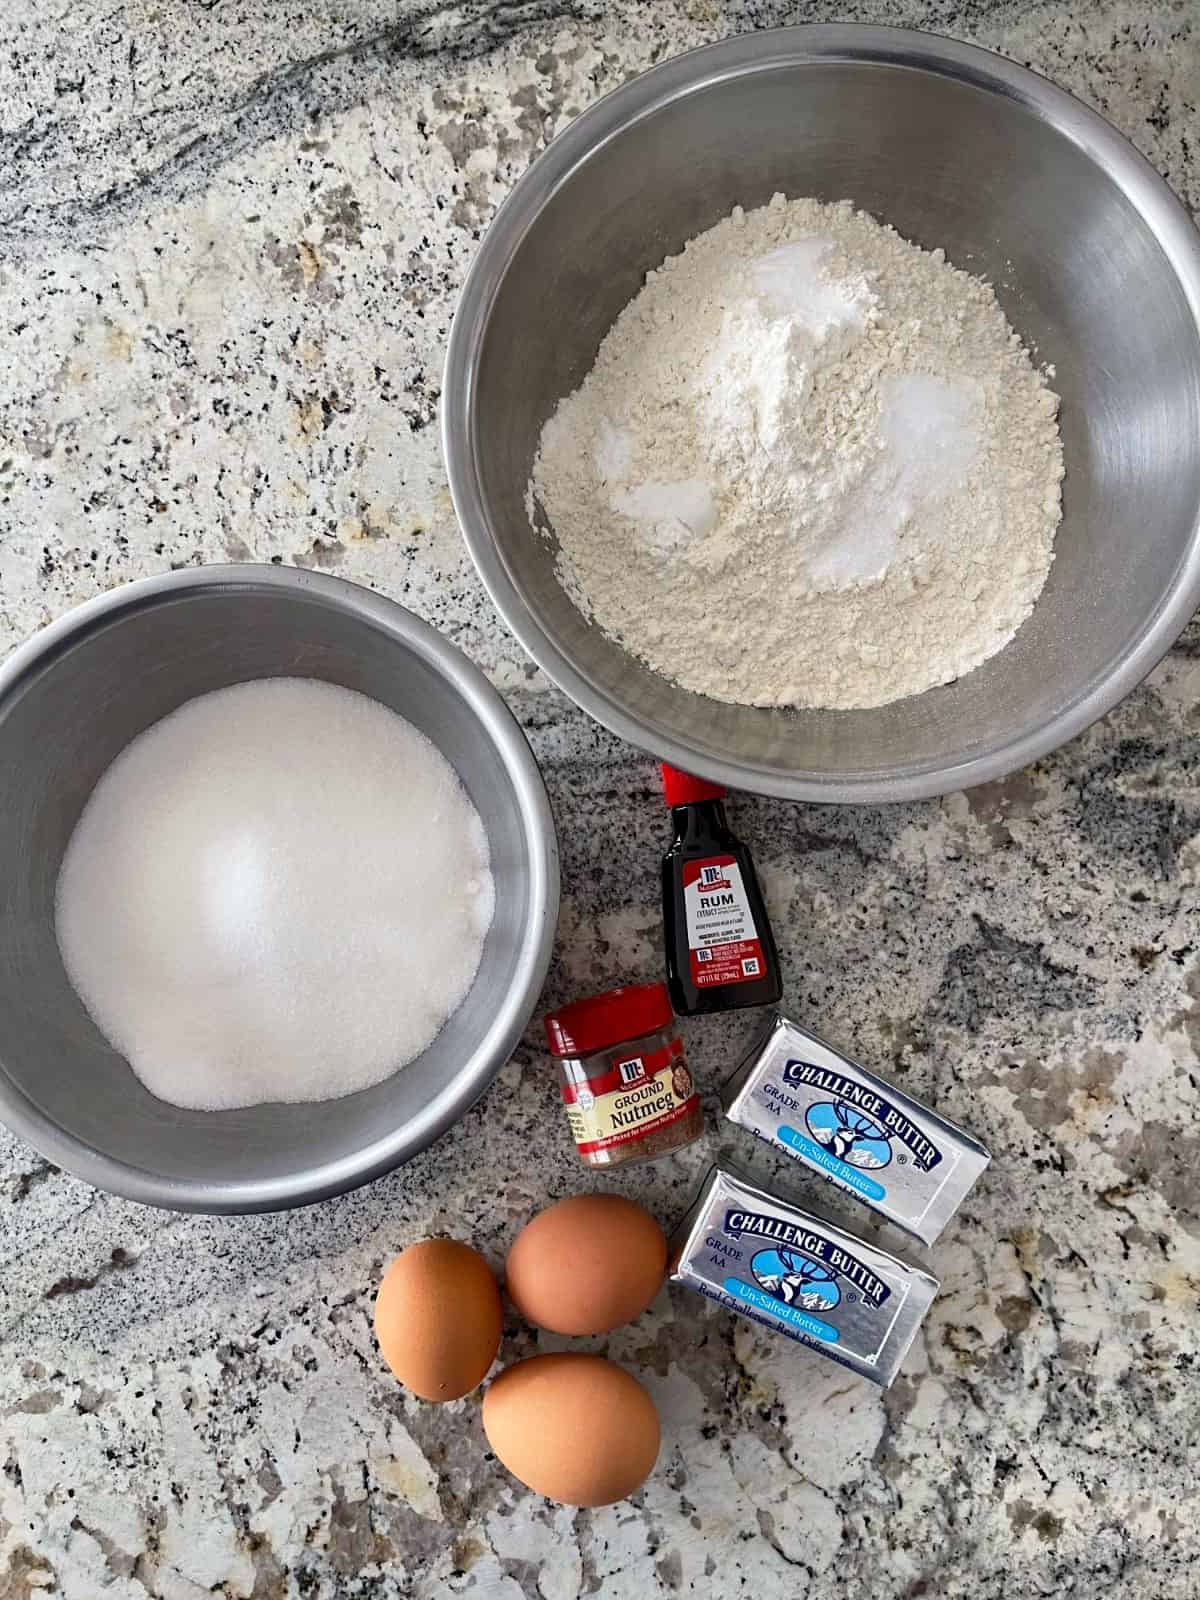 Cookie ingredients including mixing bowl with all-purpose flour, cream of tartar and baking soda, bowl of sugar, unsalted butter, 3 eggs, rum extract and ground nutmeg.